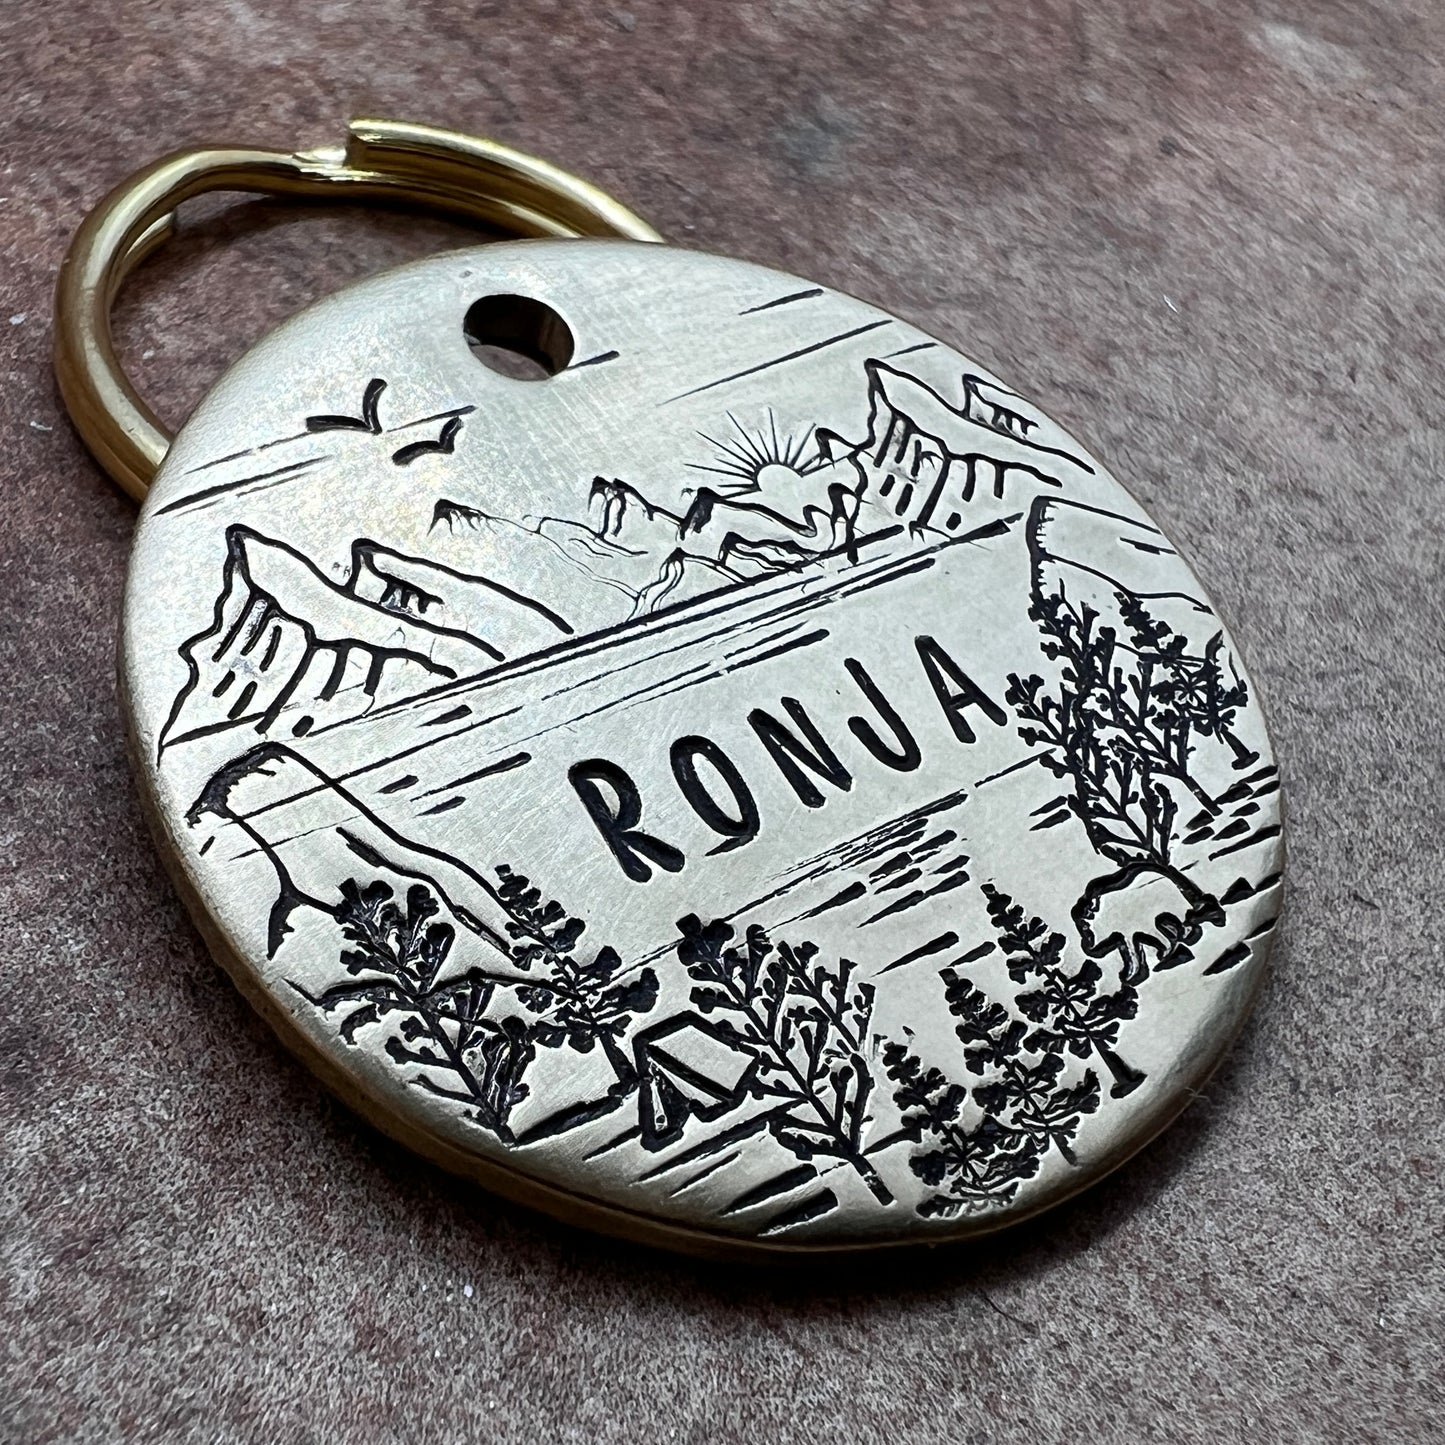 ELEMENTS design your own pet tag • Round 30mm